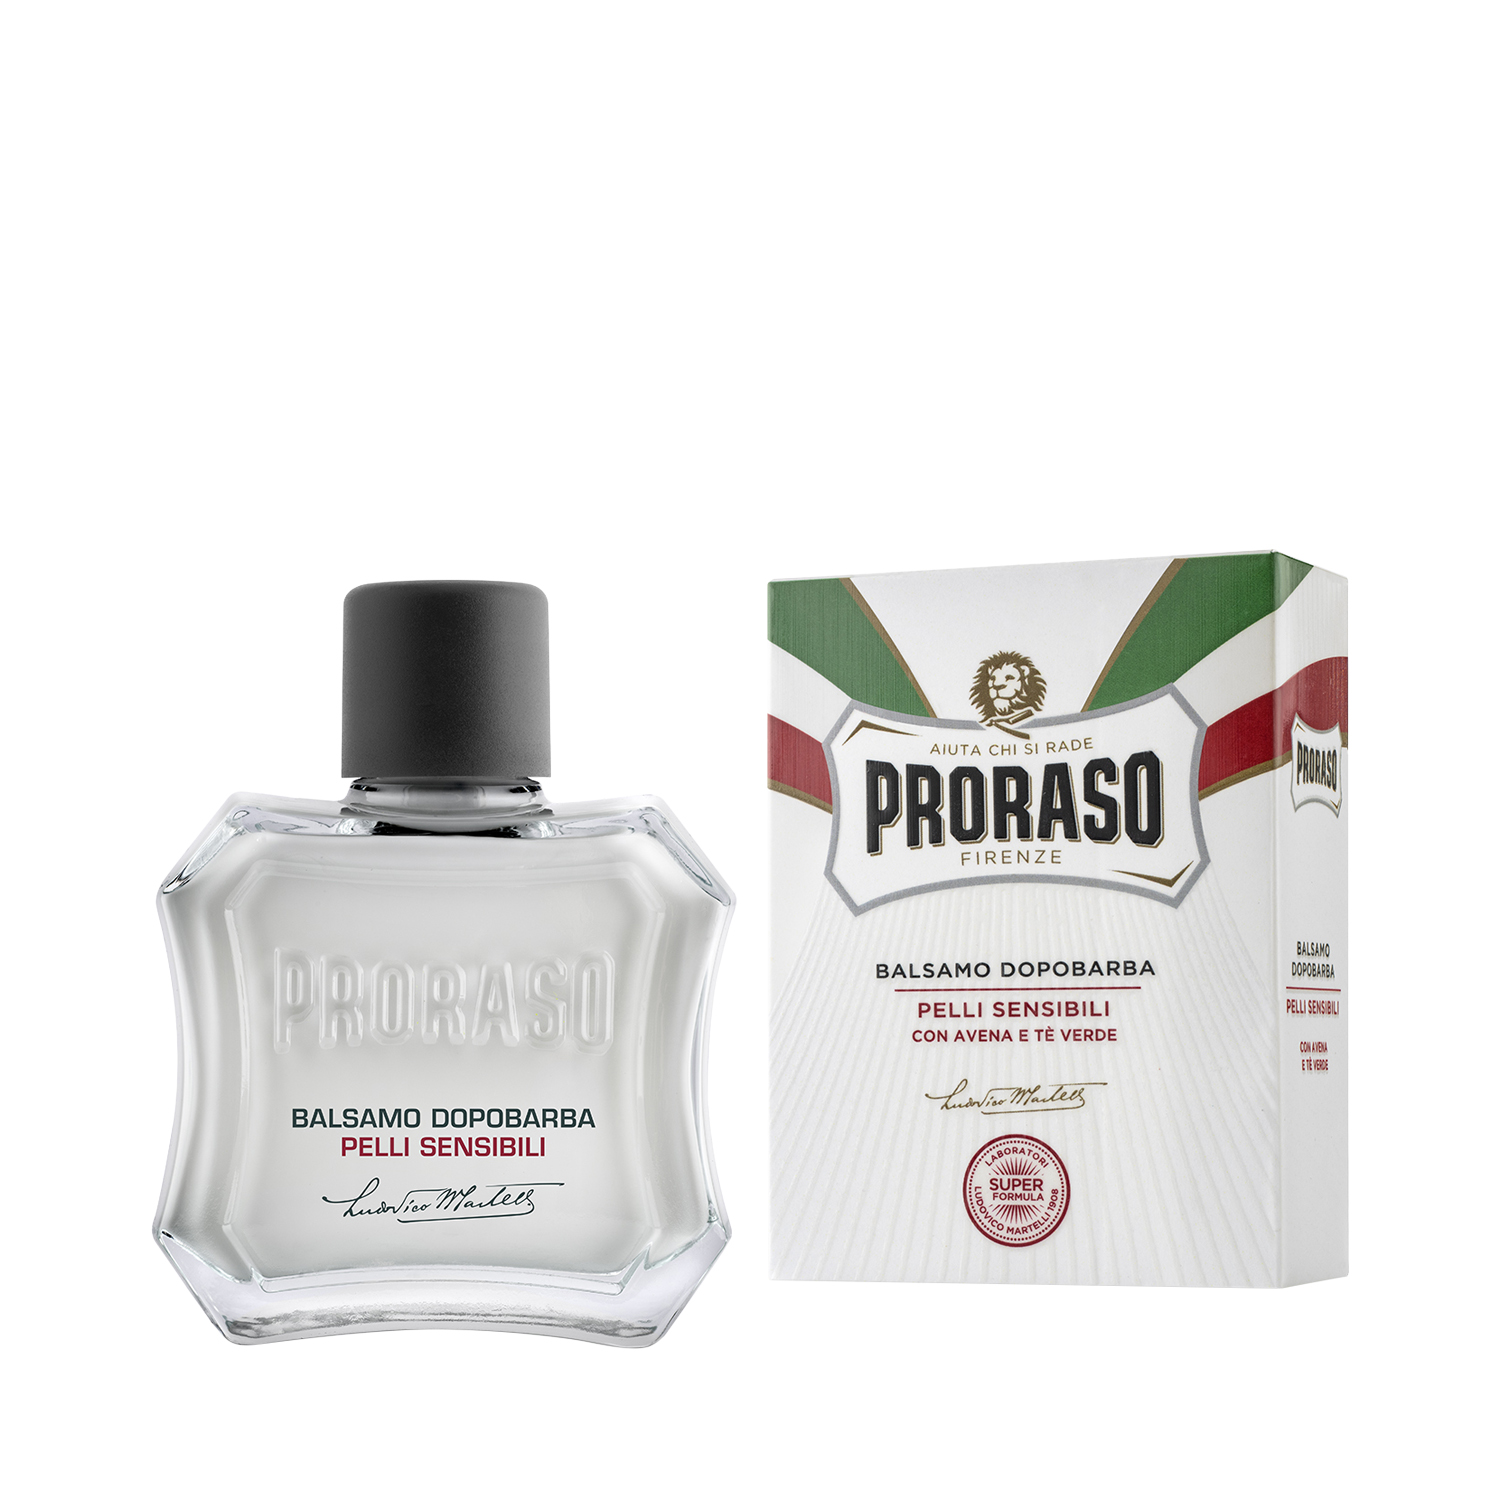 Proraso After Shave Creme